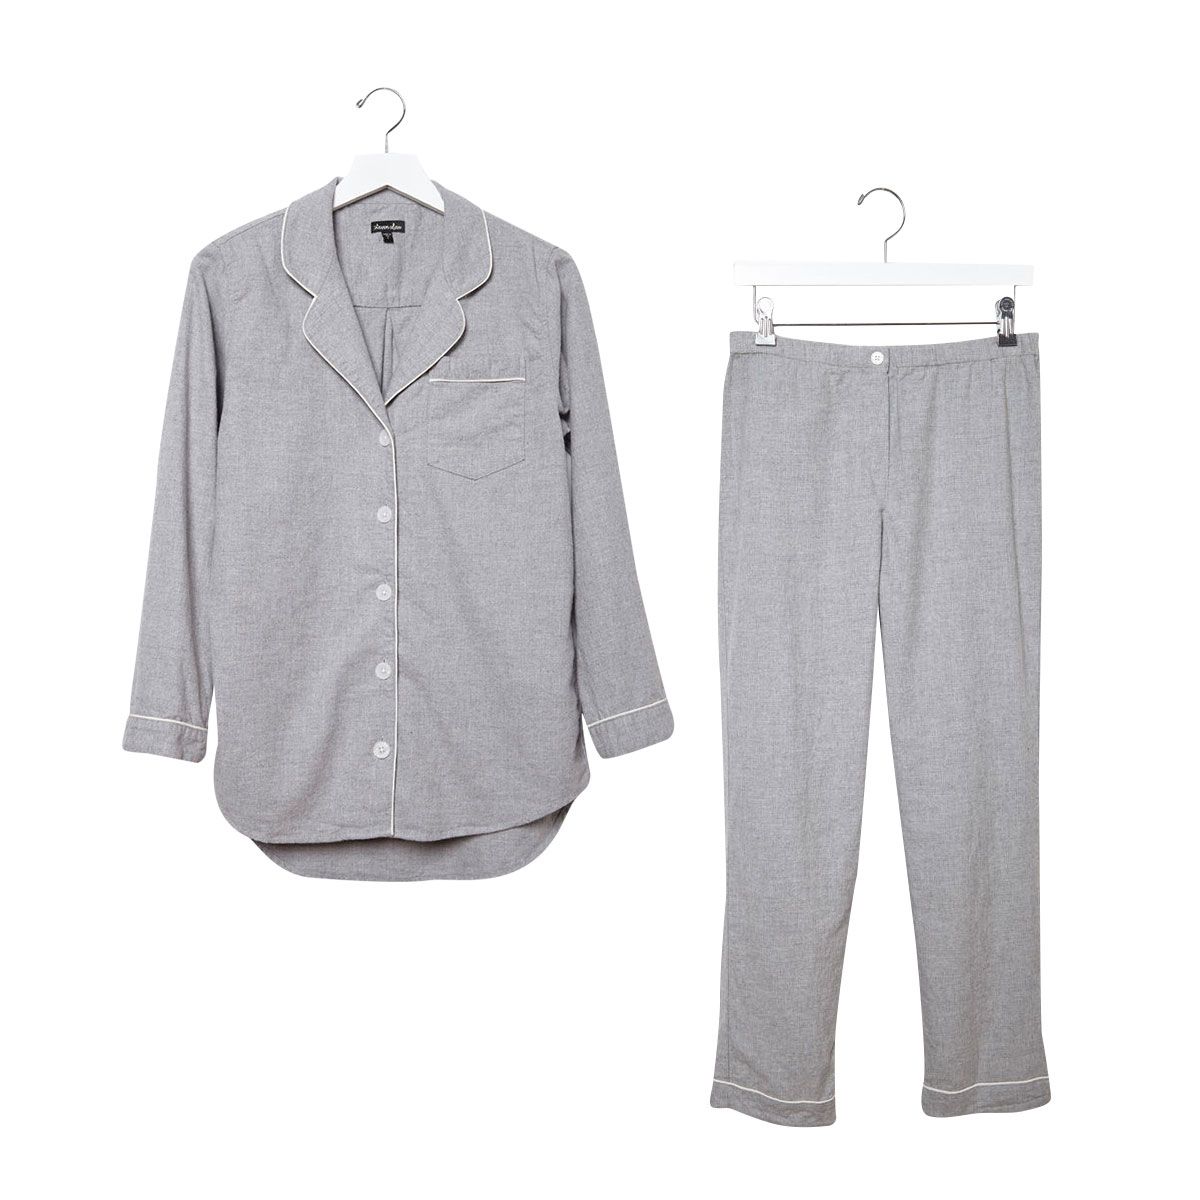 10 Pajama Sets to Wear All Day Long